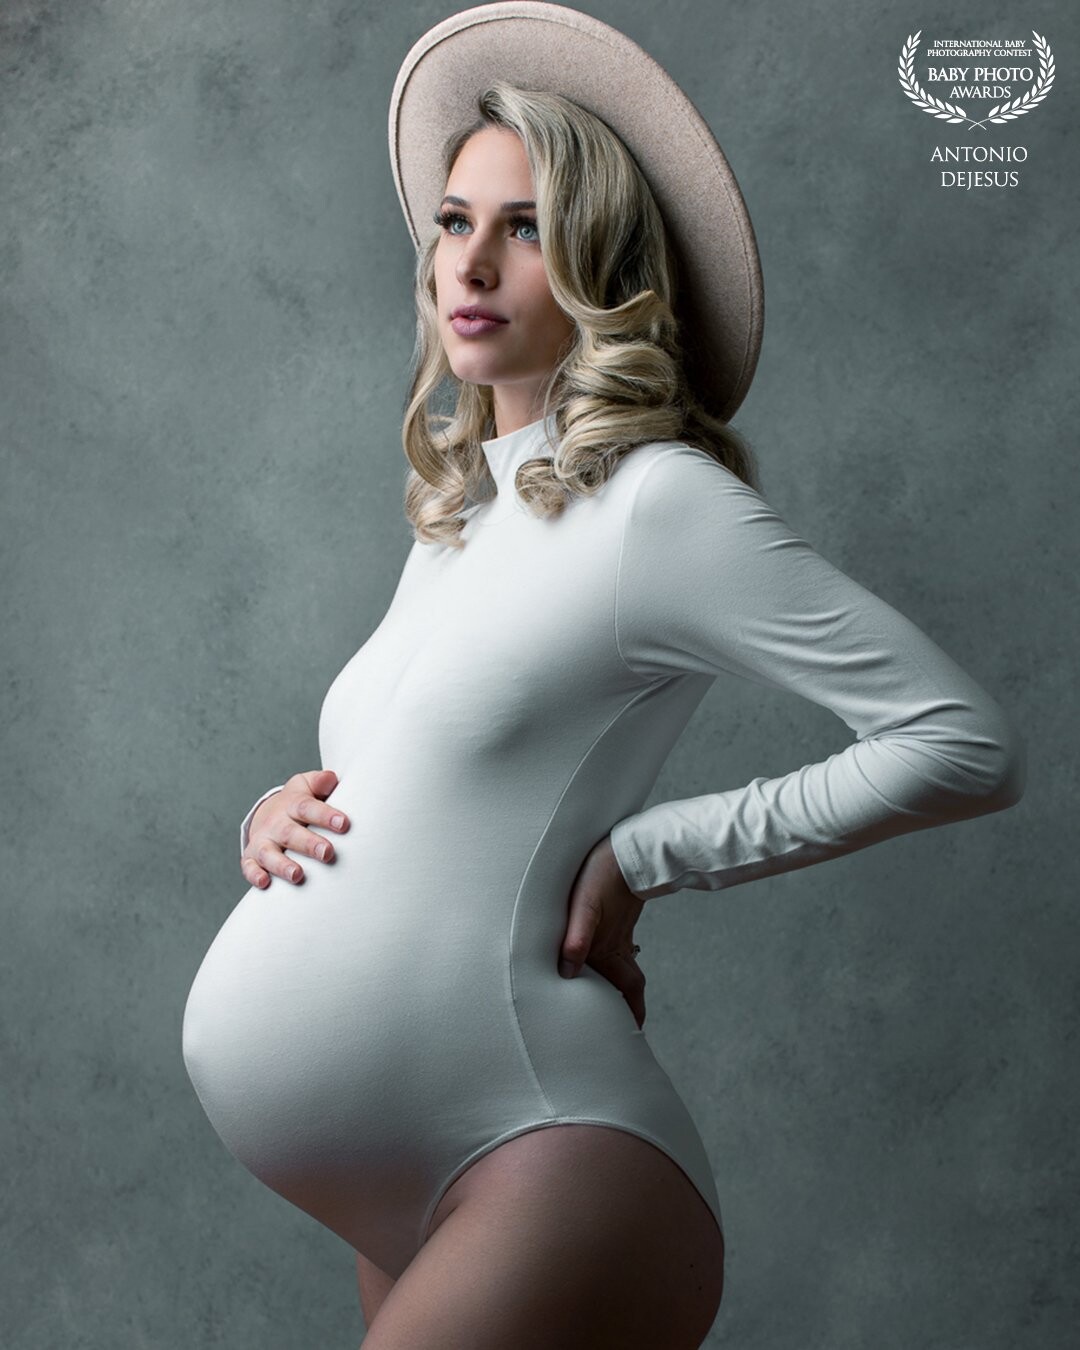 This beautiful mother is expecting her twin boys for her second pregnancy! I wanted to capture this pregnancy showing her with confidence and strength without losing the sense of maternal beauty.